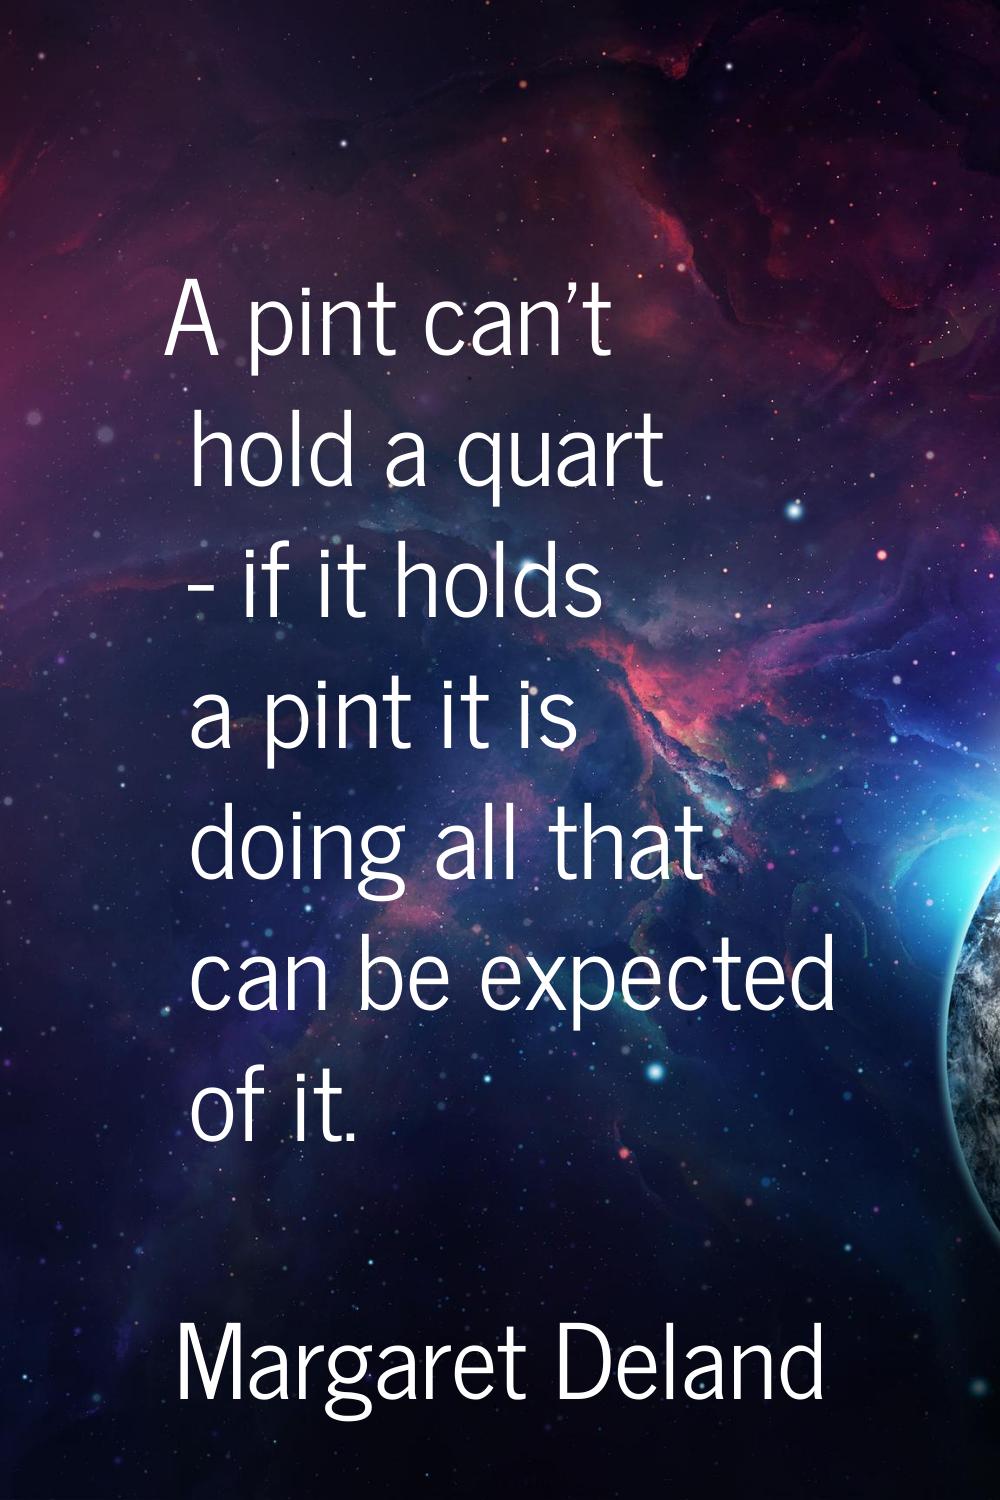 A pint can't hold a quart - if it holds a pint it is doing all that can be expected of it.